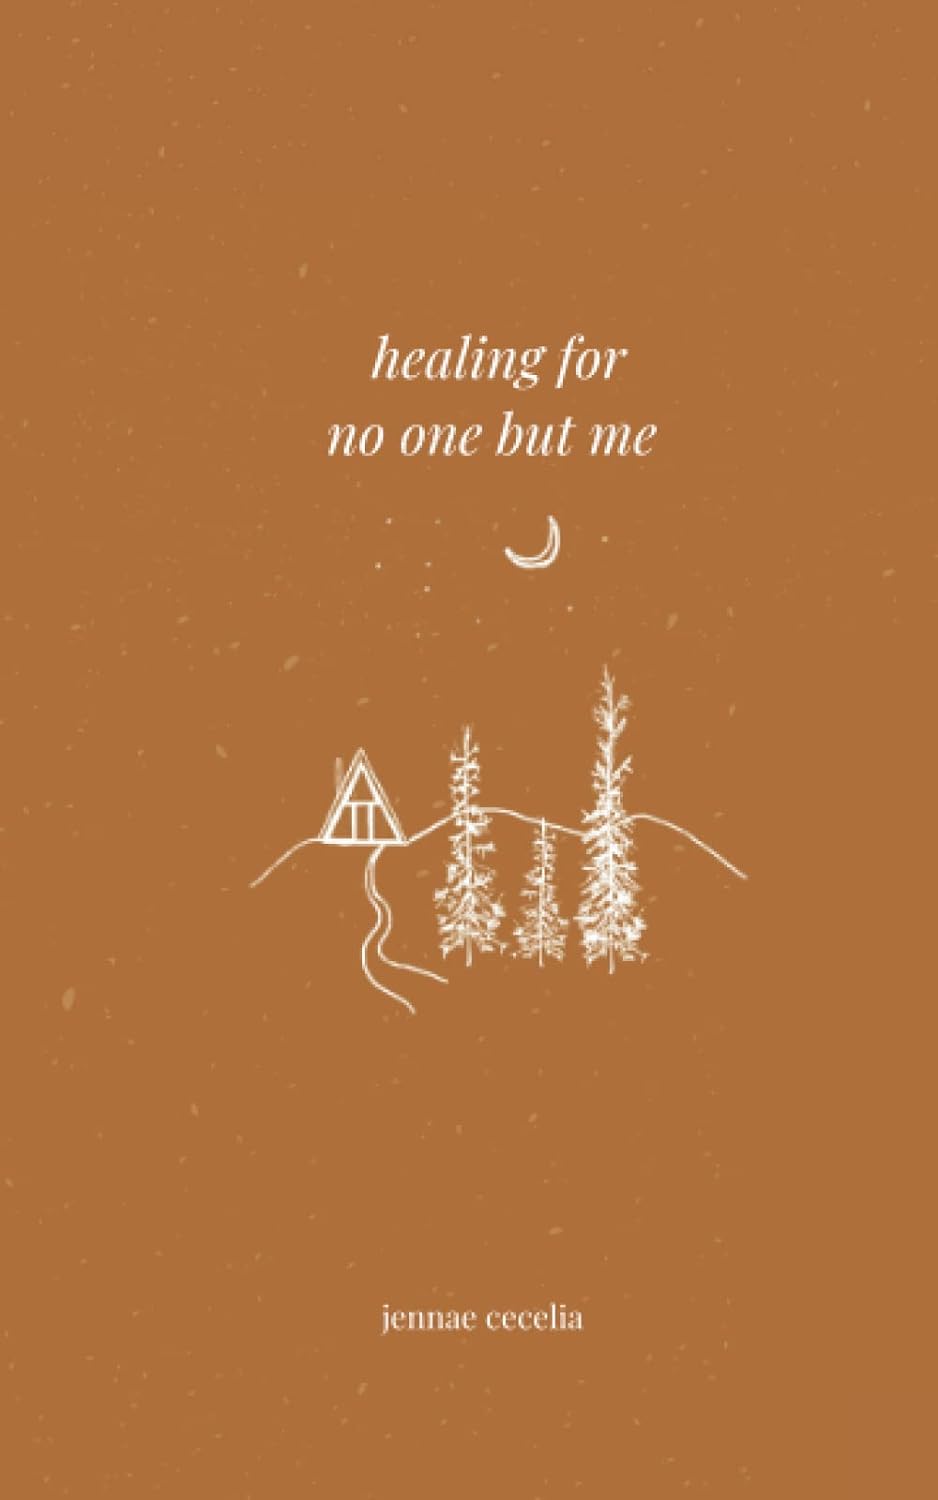 healing for no one but me - by Jennae Cecelia